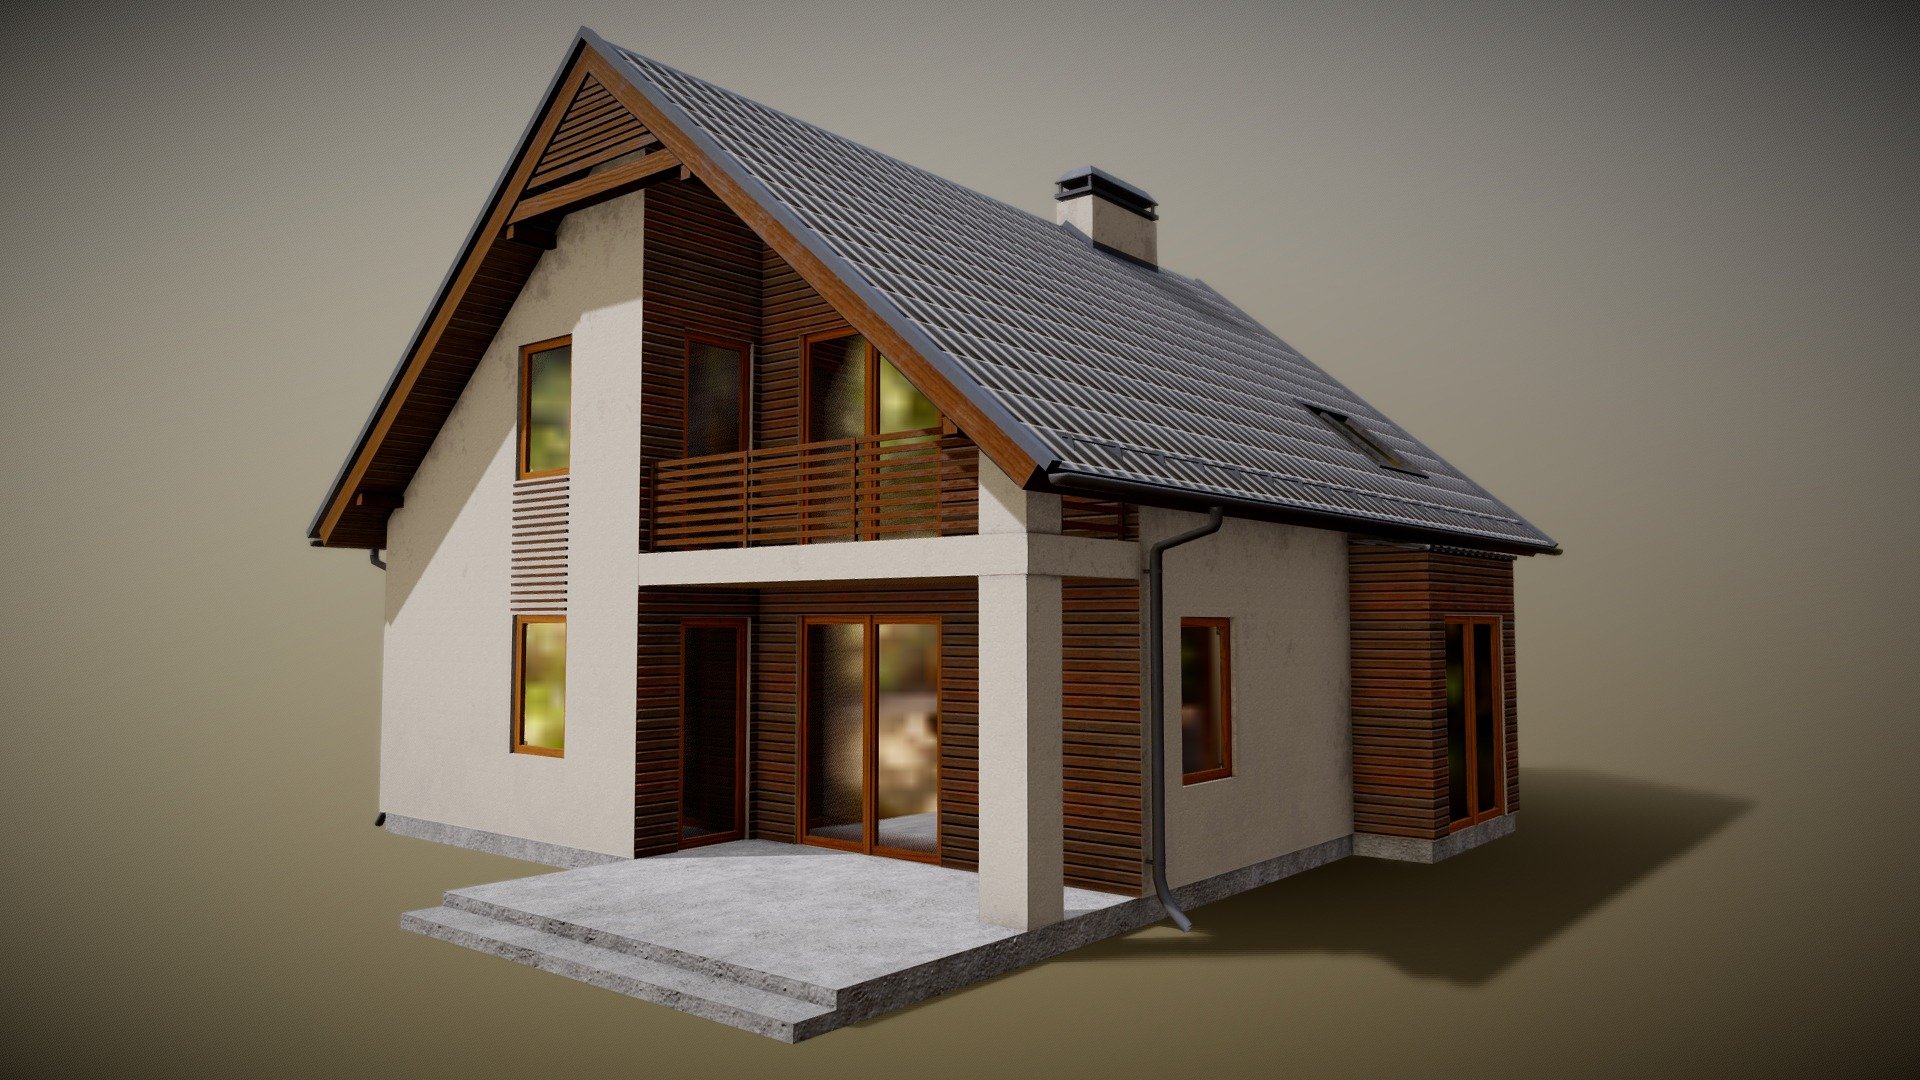 Hello!  

I am happy to present you Cottage 3 3d model.

You can buy that model at CGTrader website

Ready for game-development, render and animation!  




Native file format: Blender 2.79

Converted file formats: 3ds Max 2017, Cinema 4D R16, UnityPackage, .FBX, .OBJ.

1.996 faces total (Only Quads and Tris topology used).

TEXTURES: 




Base_Color.png (4096x4096px) 

Normal.png (4096x4096px) 

Metallic.png (4096x4096px) 

Roughness.png (4096x4096px) 

Height.png (4096x4096px) 

AO.png (4096x4096px) 

Windows_mask.png (4096x4096px)

MetallicSmoothness.png (4096x4096px)

Dirt_Base_Color.png (4096x4096px)   

Dirt_Roughness.png (4096x4096px).

DESCRIPTION:  




Textures of cottage and dirt are made separately. You can overlay textures of dirt or leave the cottage clean.

Model is fully textured with all materials applied. 

LowPoly model, that is perfect for even mobile game-dev. 

PBR materials, as you can see on the preview. 

Gerhald3D - Low-Poly PBR Cottage 3 - 3D model by Gerhald 3d model